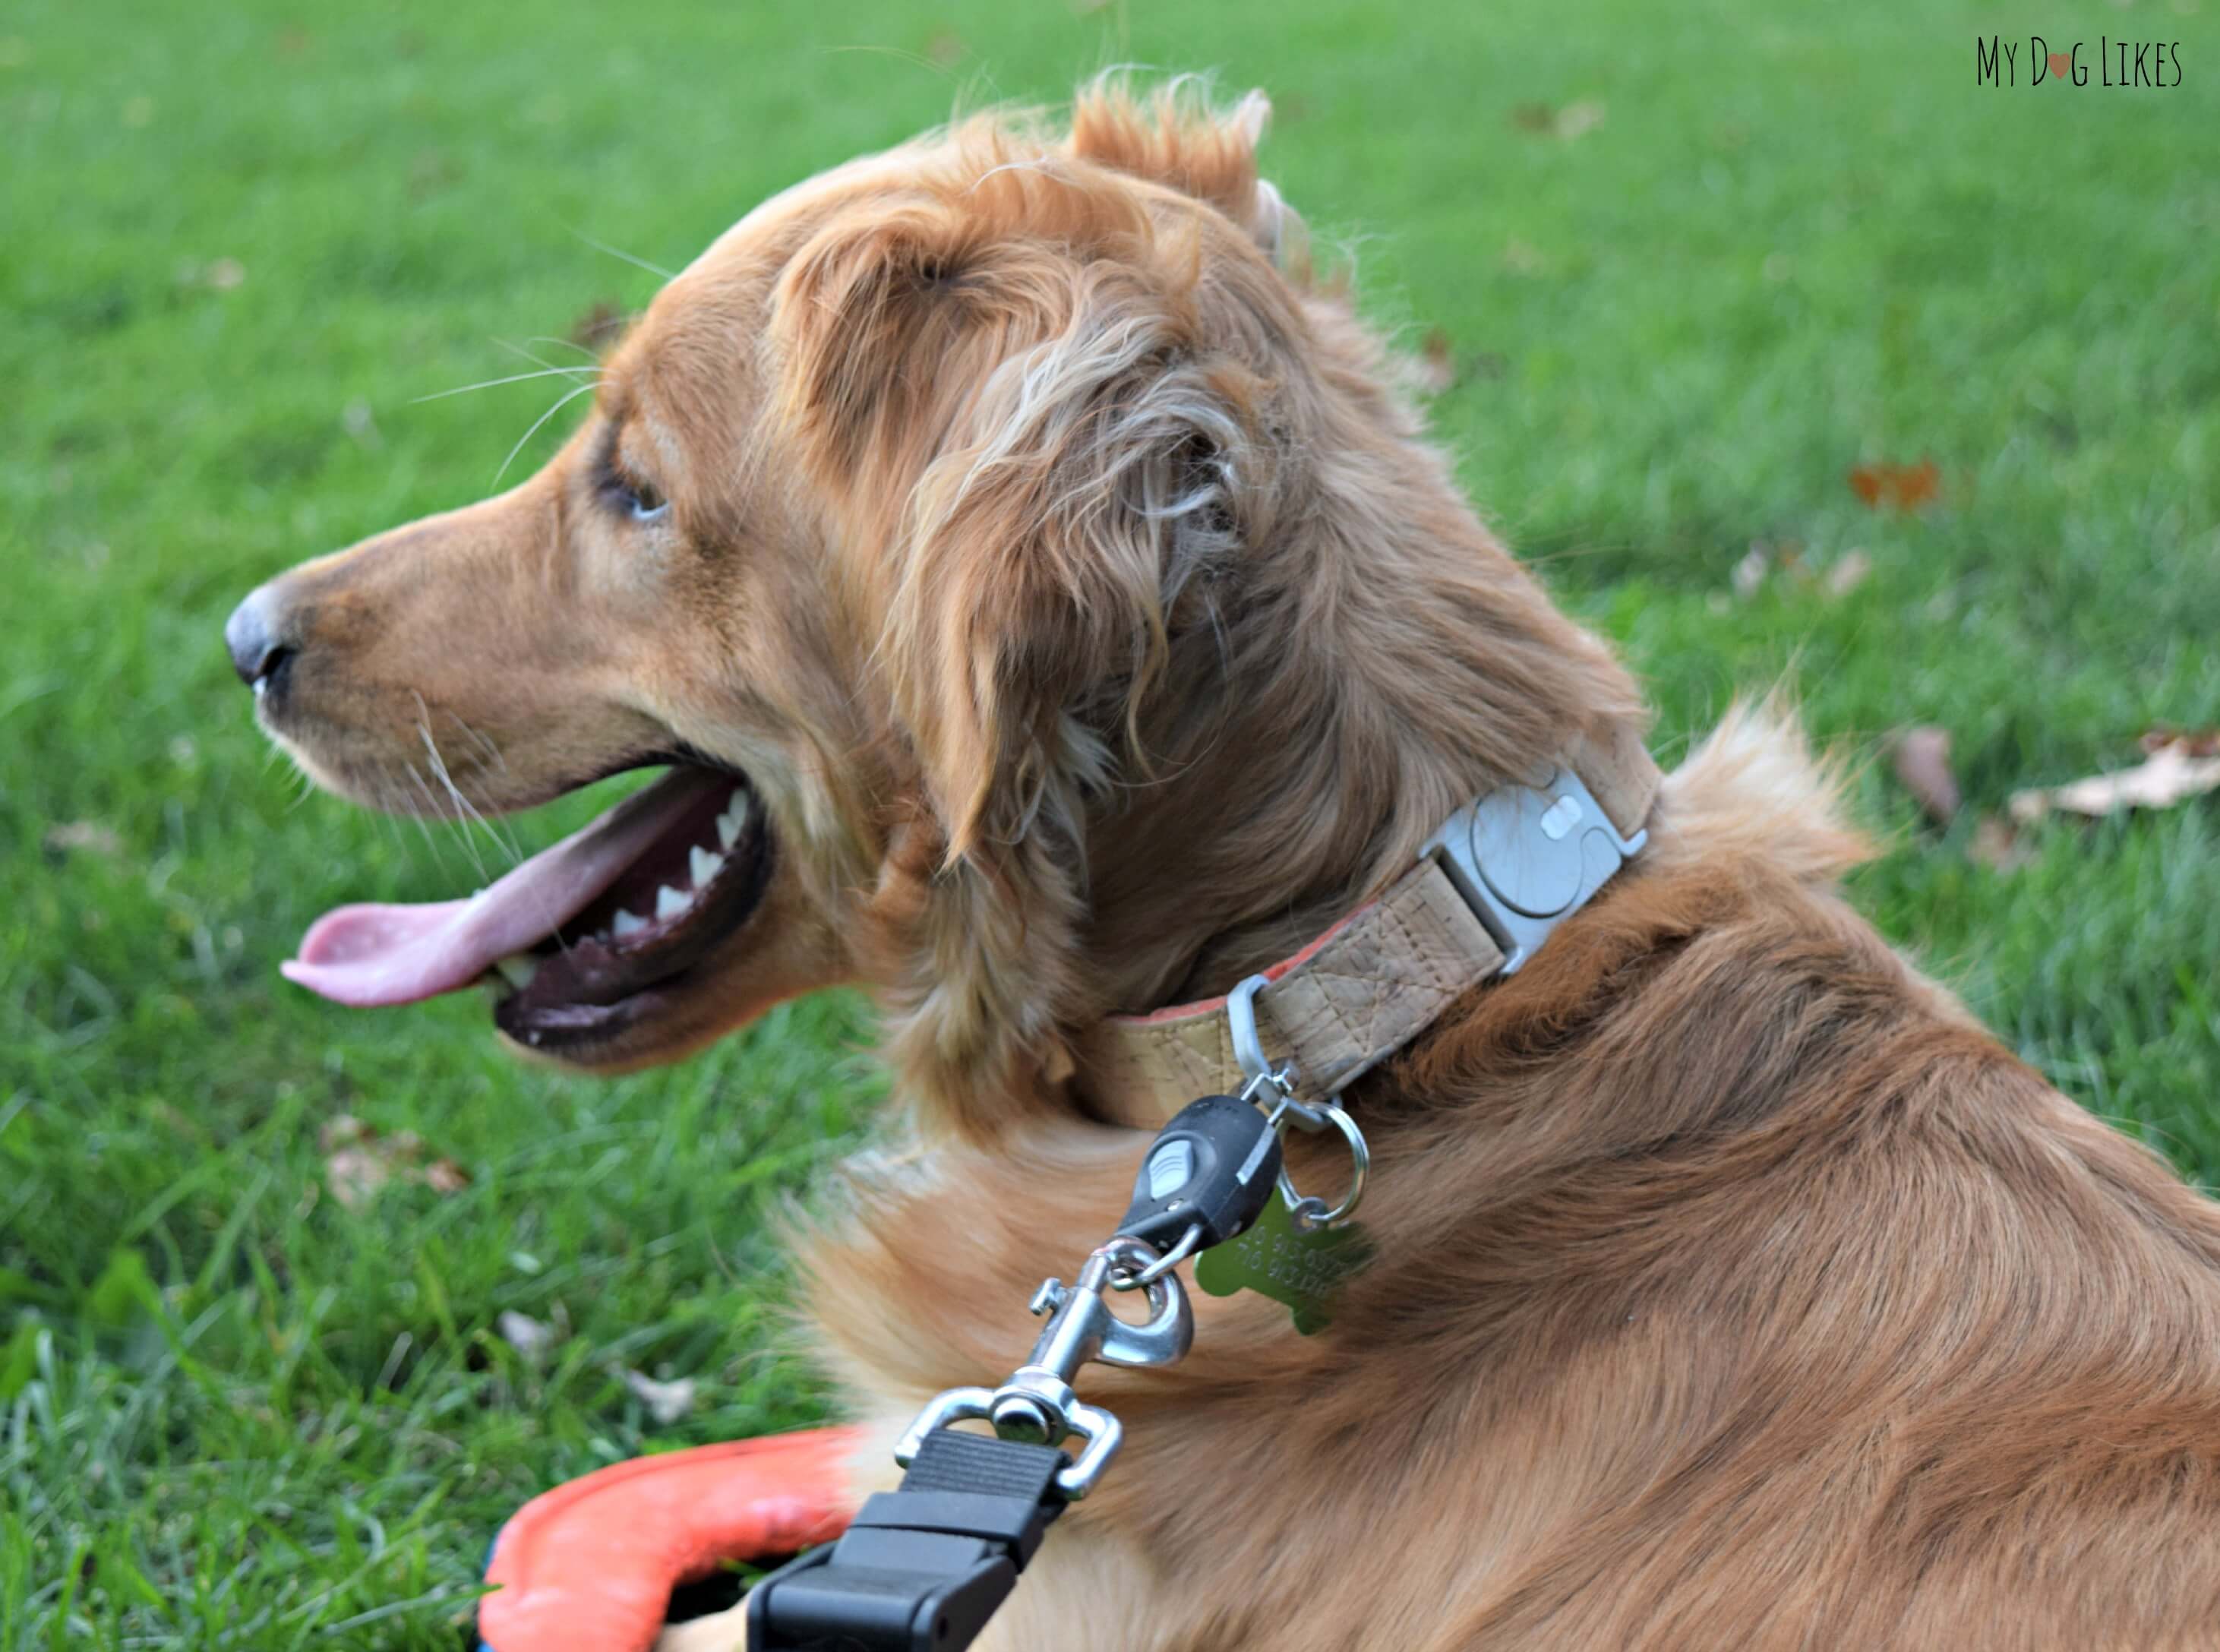 Magic Latch Review - Hands-Free Magnetic Leash and Collar Attachement